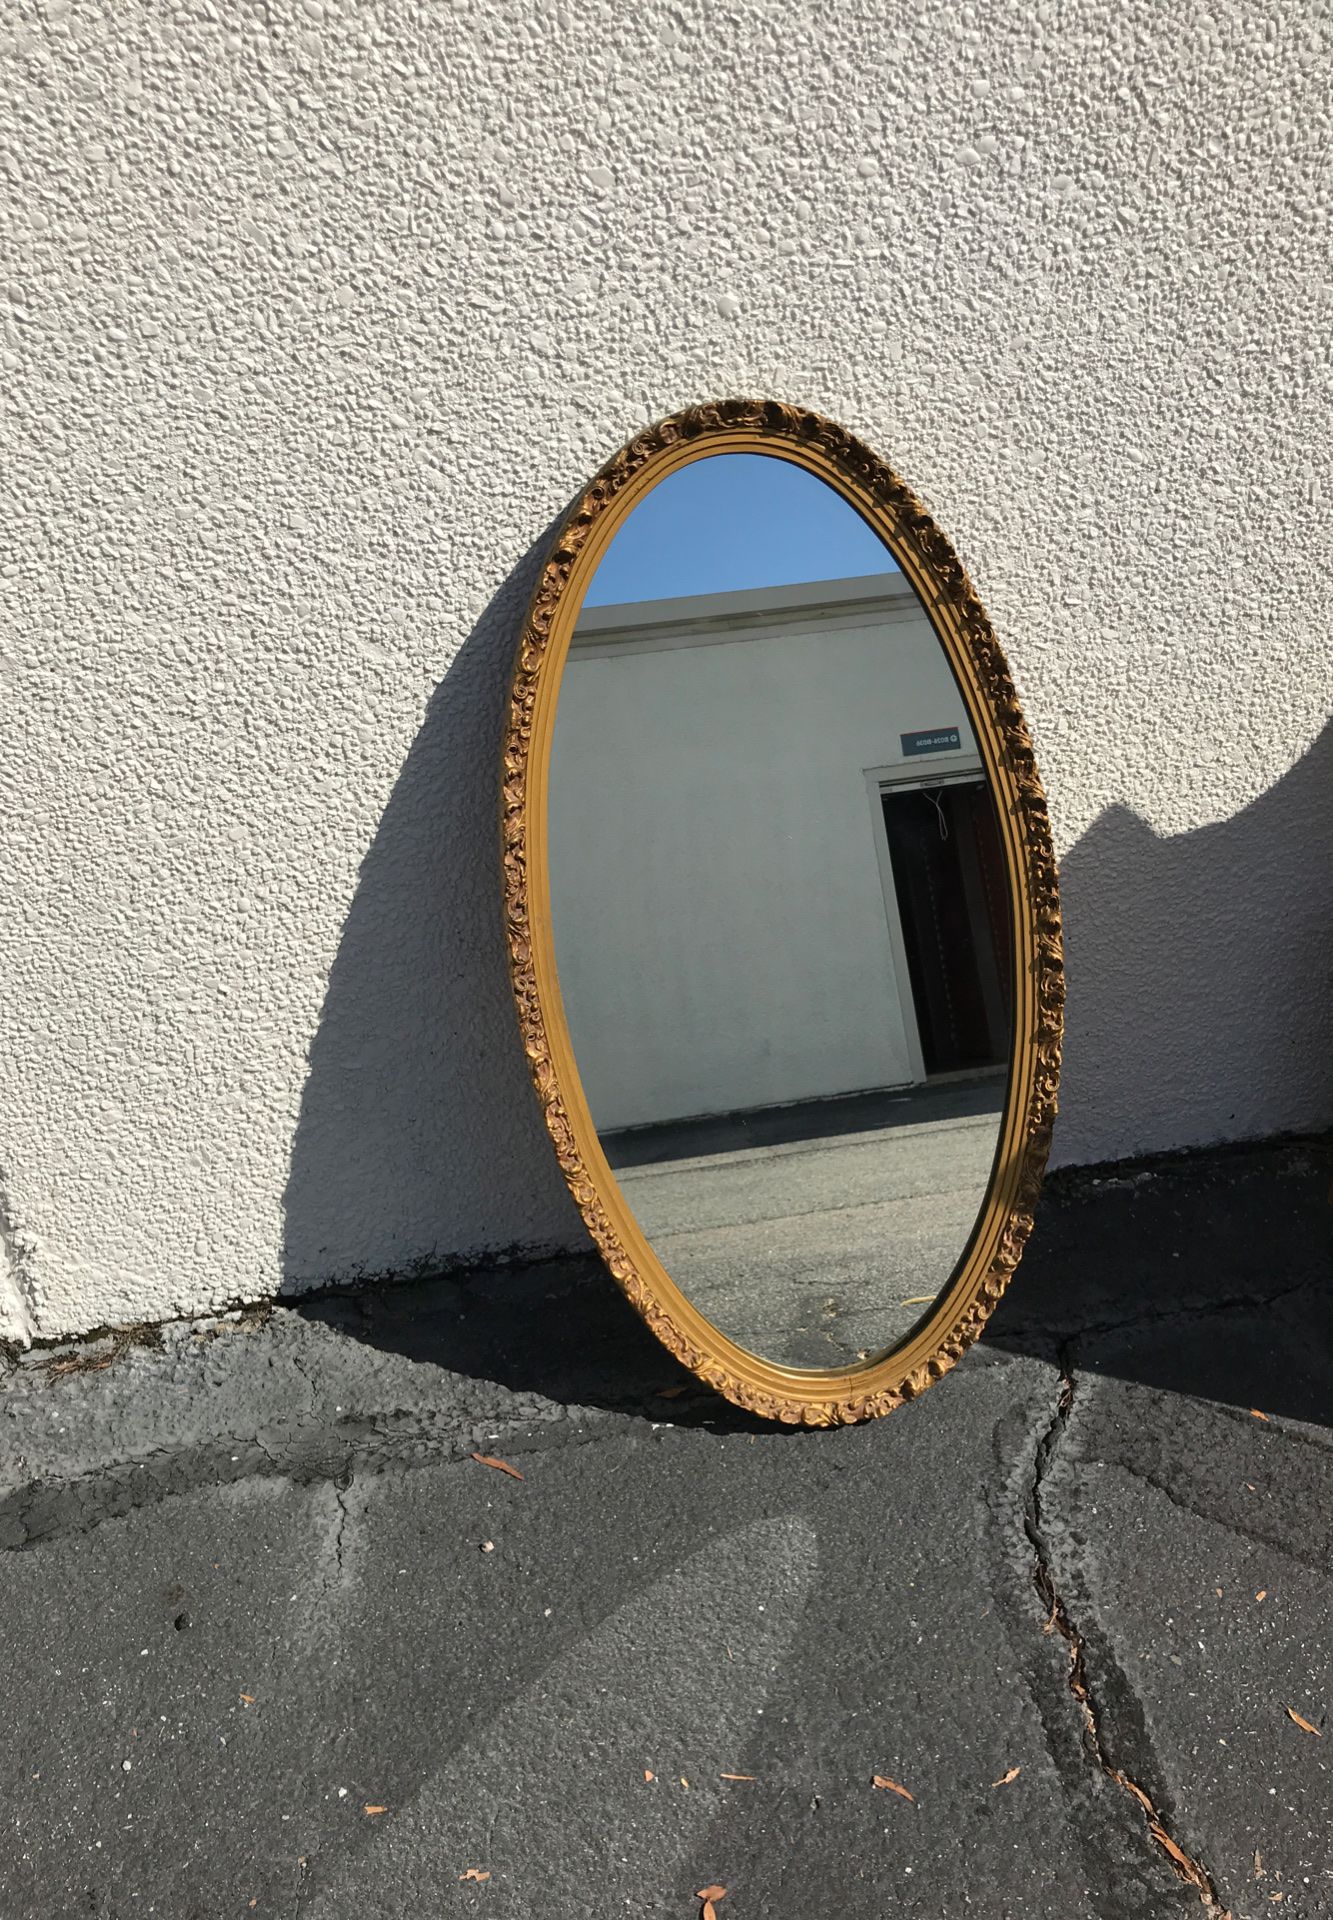 Old oval mirror